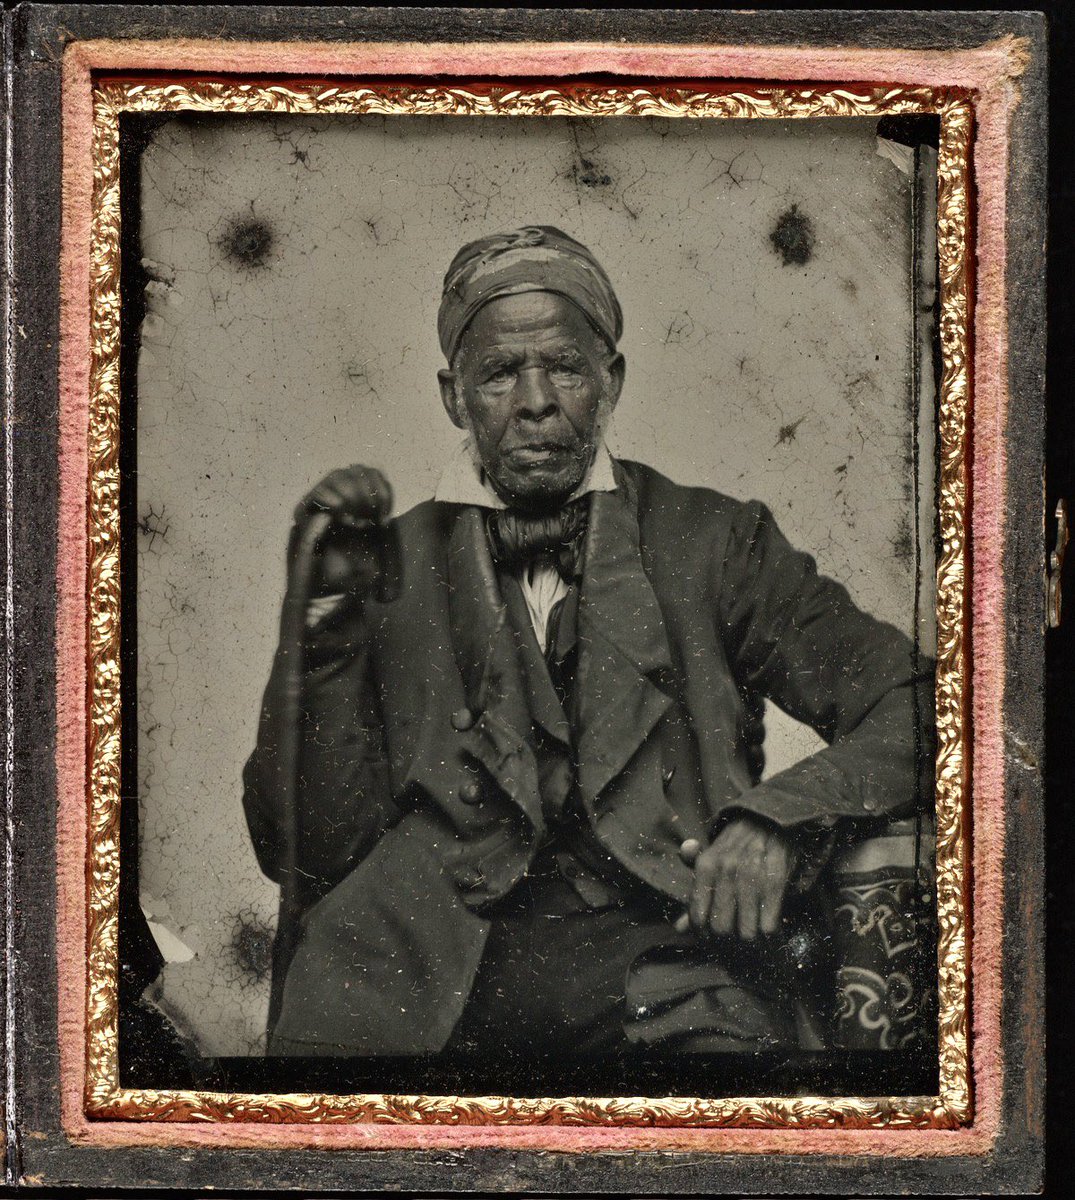 In 1807, Omar ibn Said, a Muslim scholar, was stolen from Senegal & sold into slavery in America. He left behind an autobiography written in Arabic.

To mark the International Day for the Remembrance of the Slave Trade & its Abolition, a thread on the remarkable story of Omar…